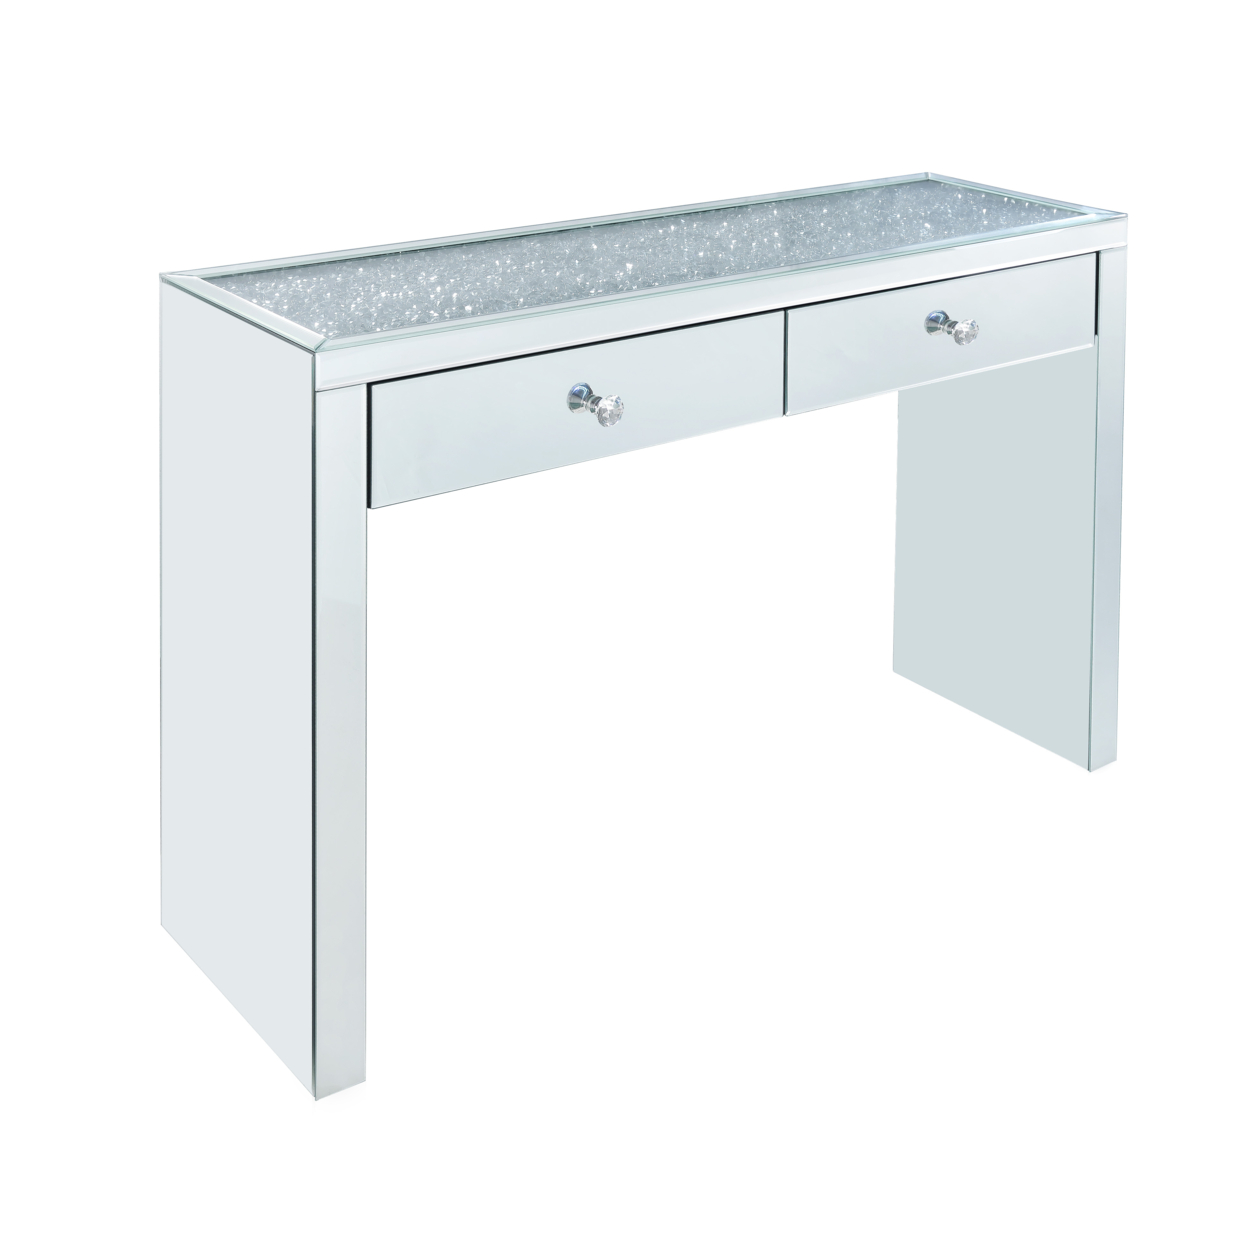 Wooden Console Table With 2 Storage Drawers And Faux Diamond Inlay, Silver- Saltoro Sherpi